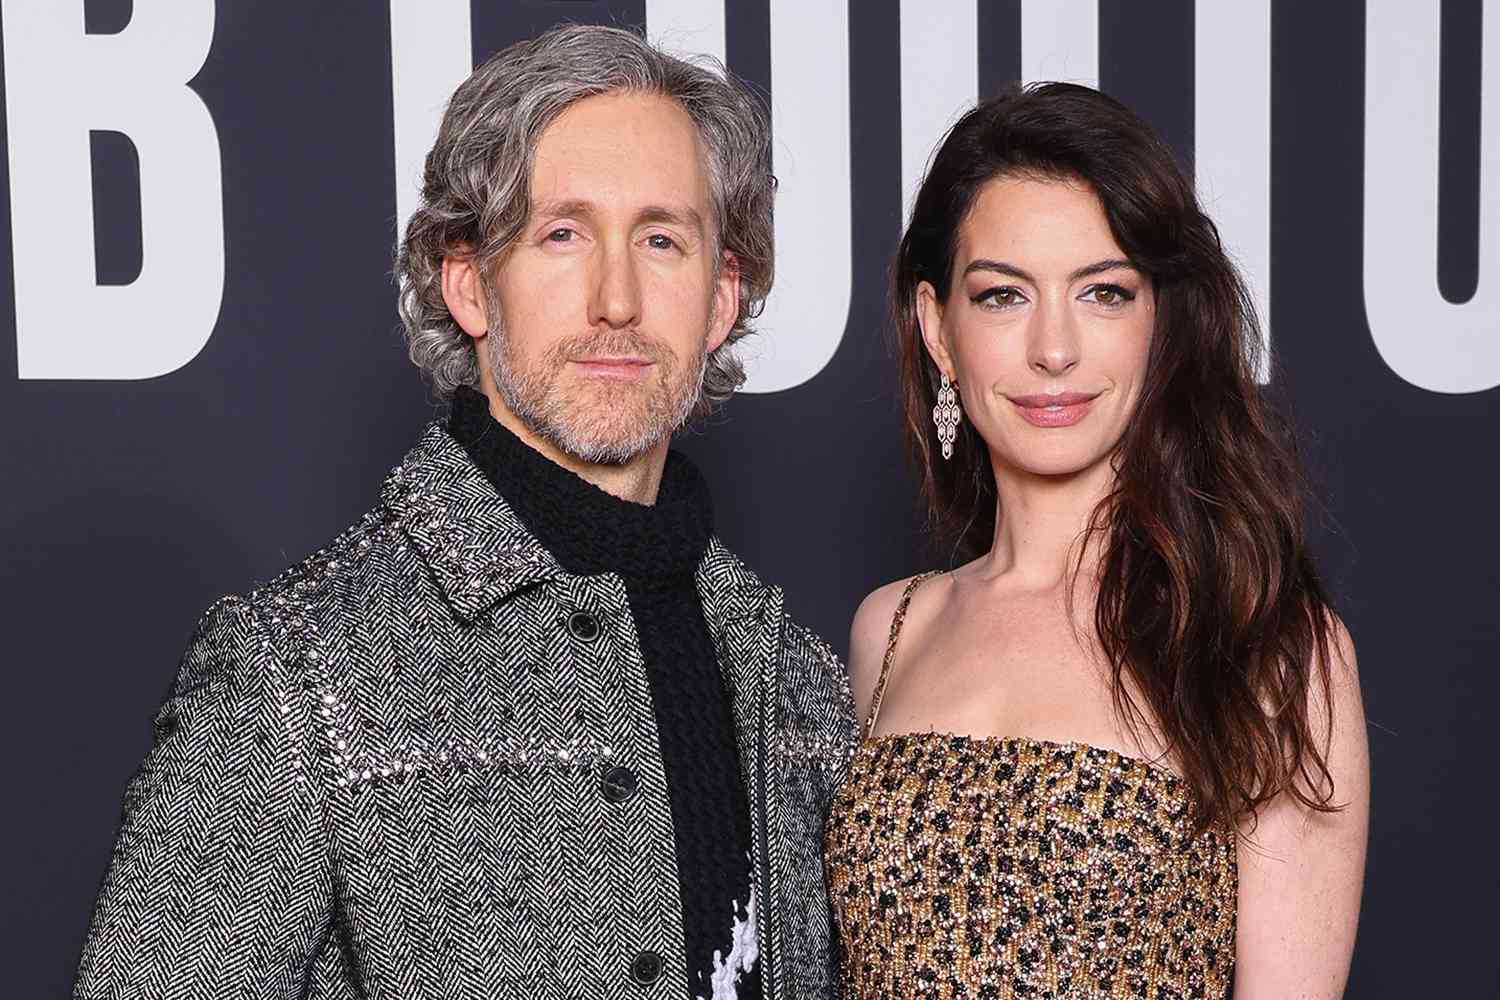 Anne Hathaway's Husband Adam Shulman Biography: Age, Net Worth, Movies, Instagram, Wikipedia, Nationality, Spouse